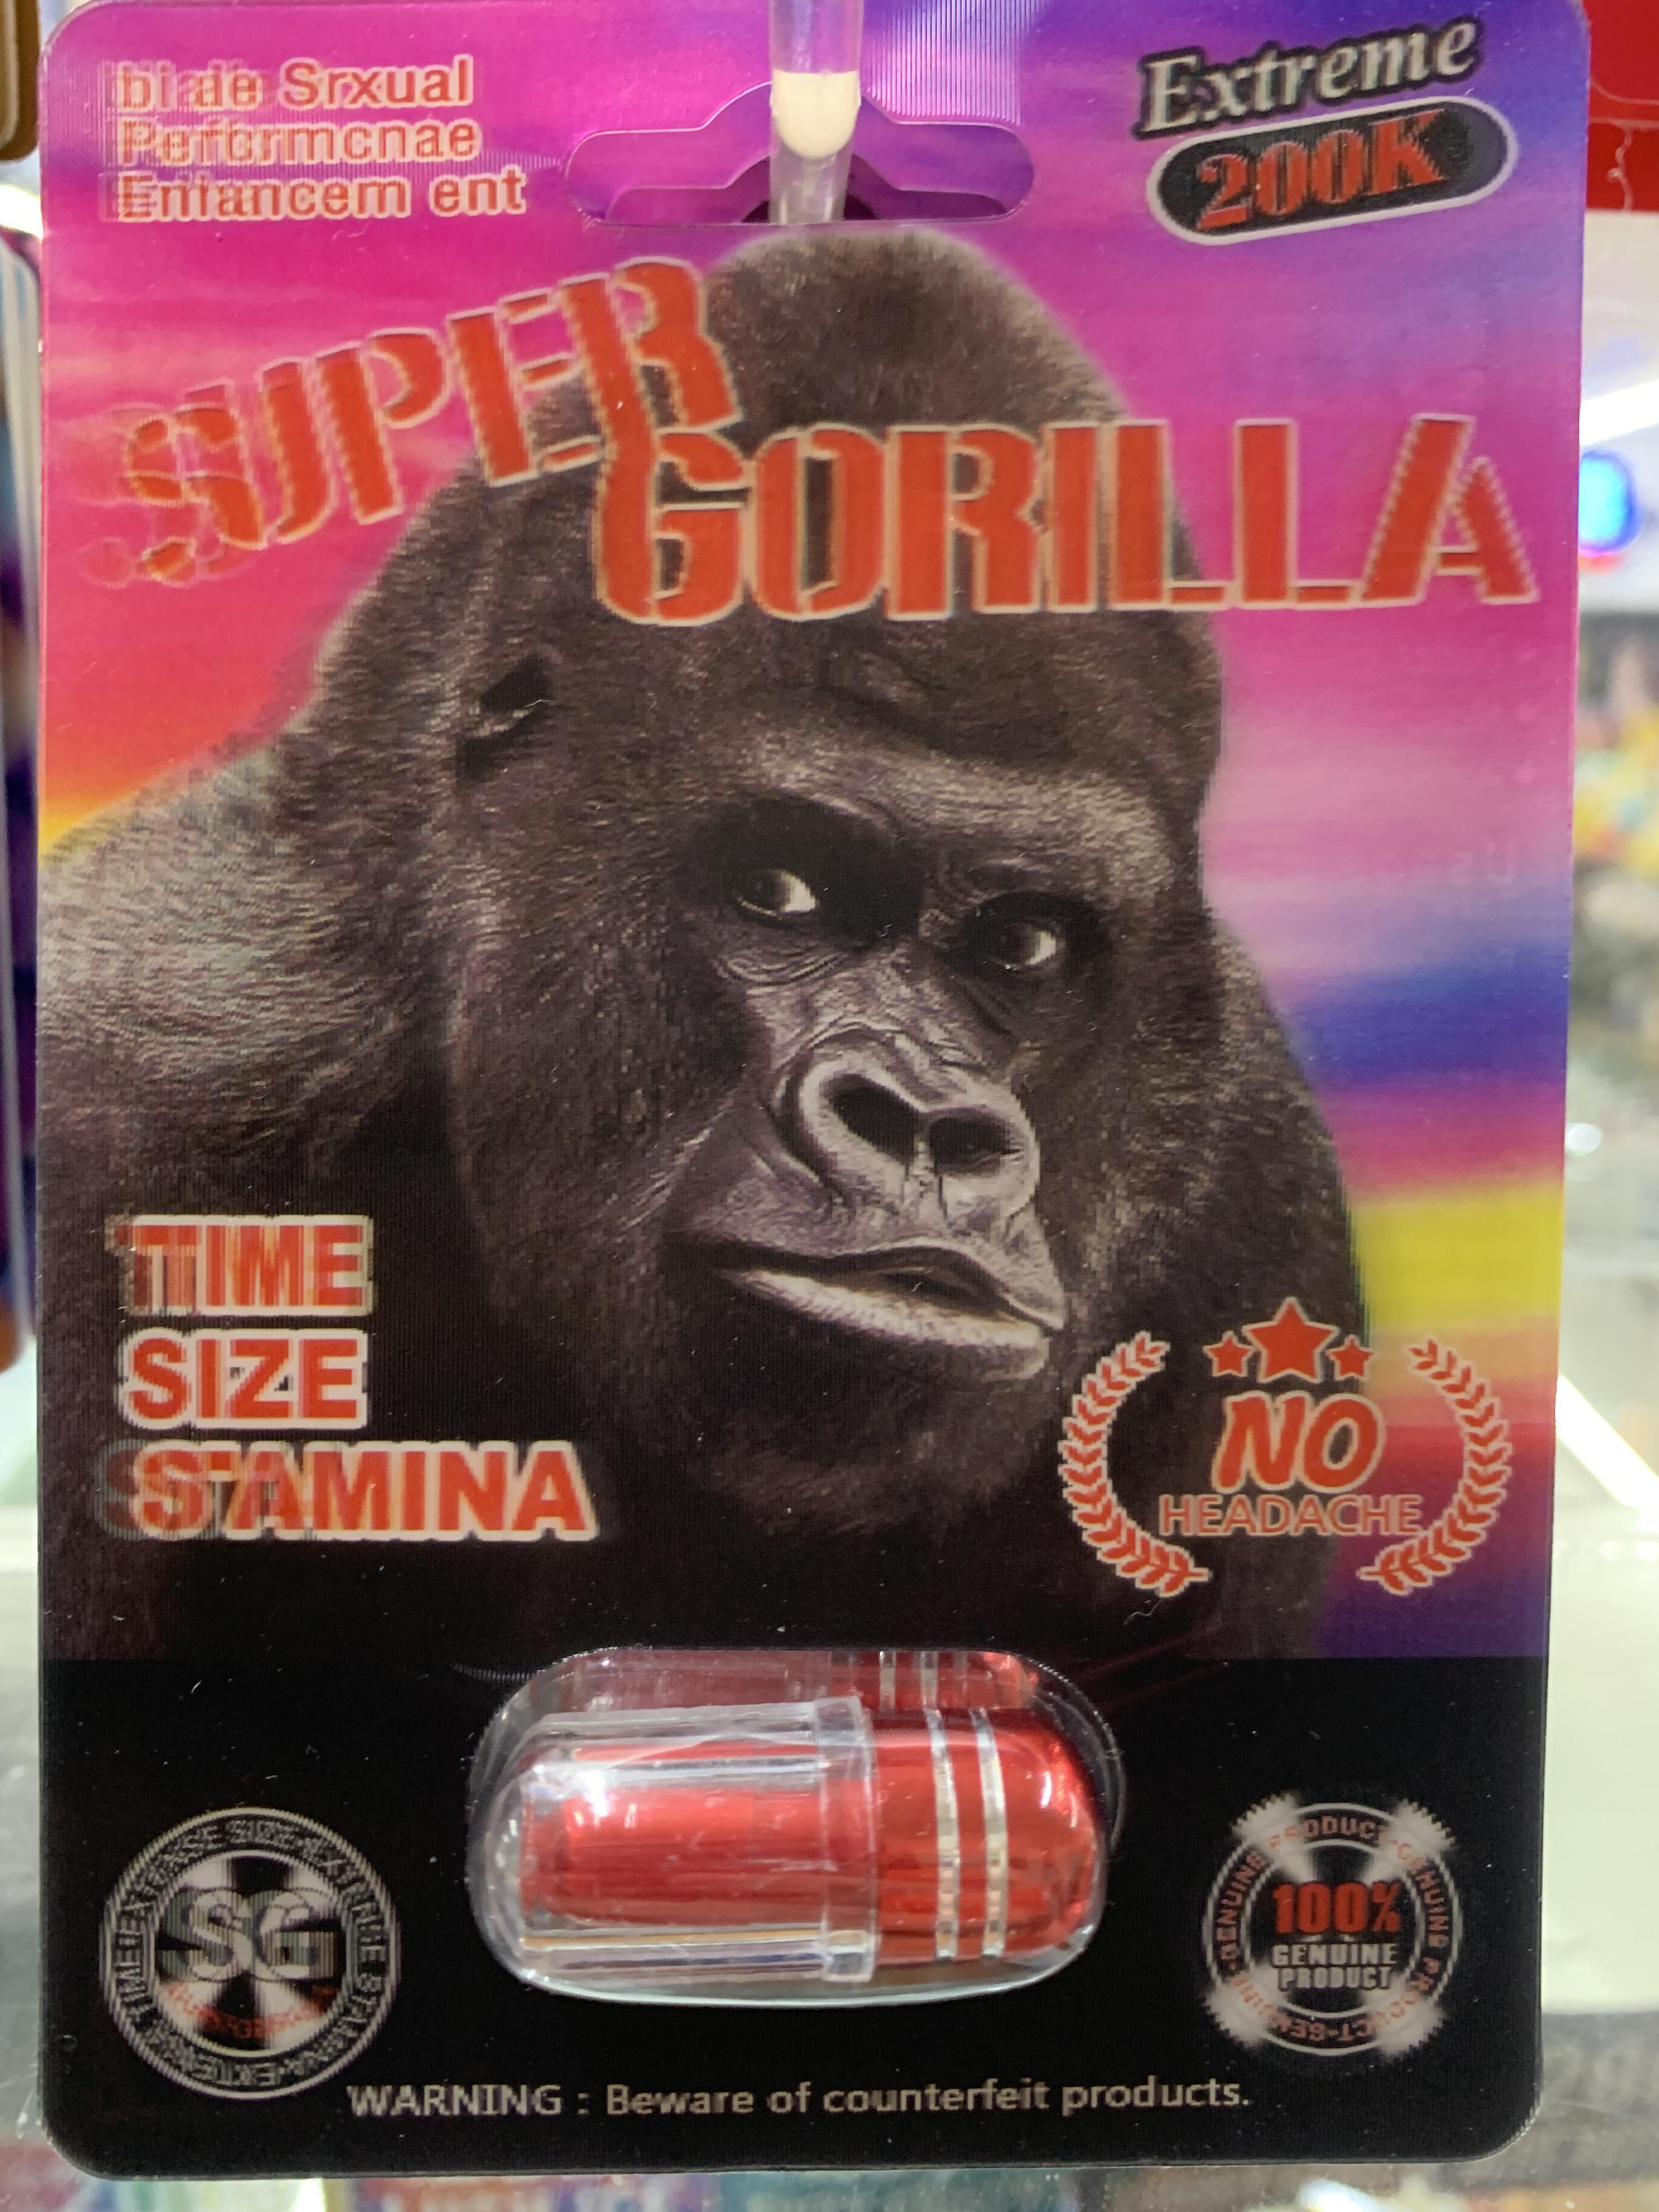 Part 11 of our ongoing series Knoxville Gas Station Enhancement Pills: Cincinnati Zoo Edition